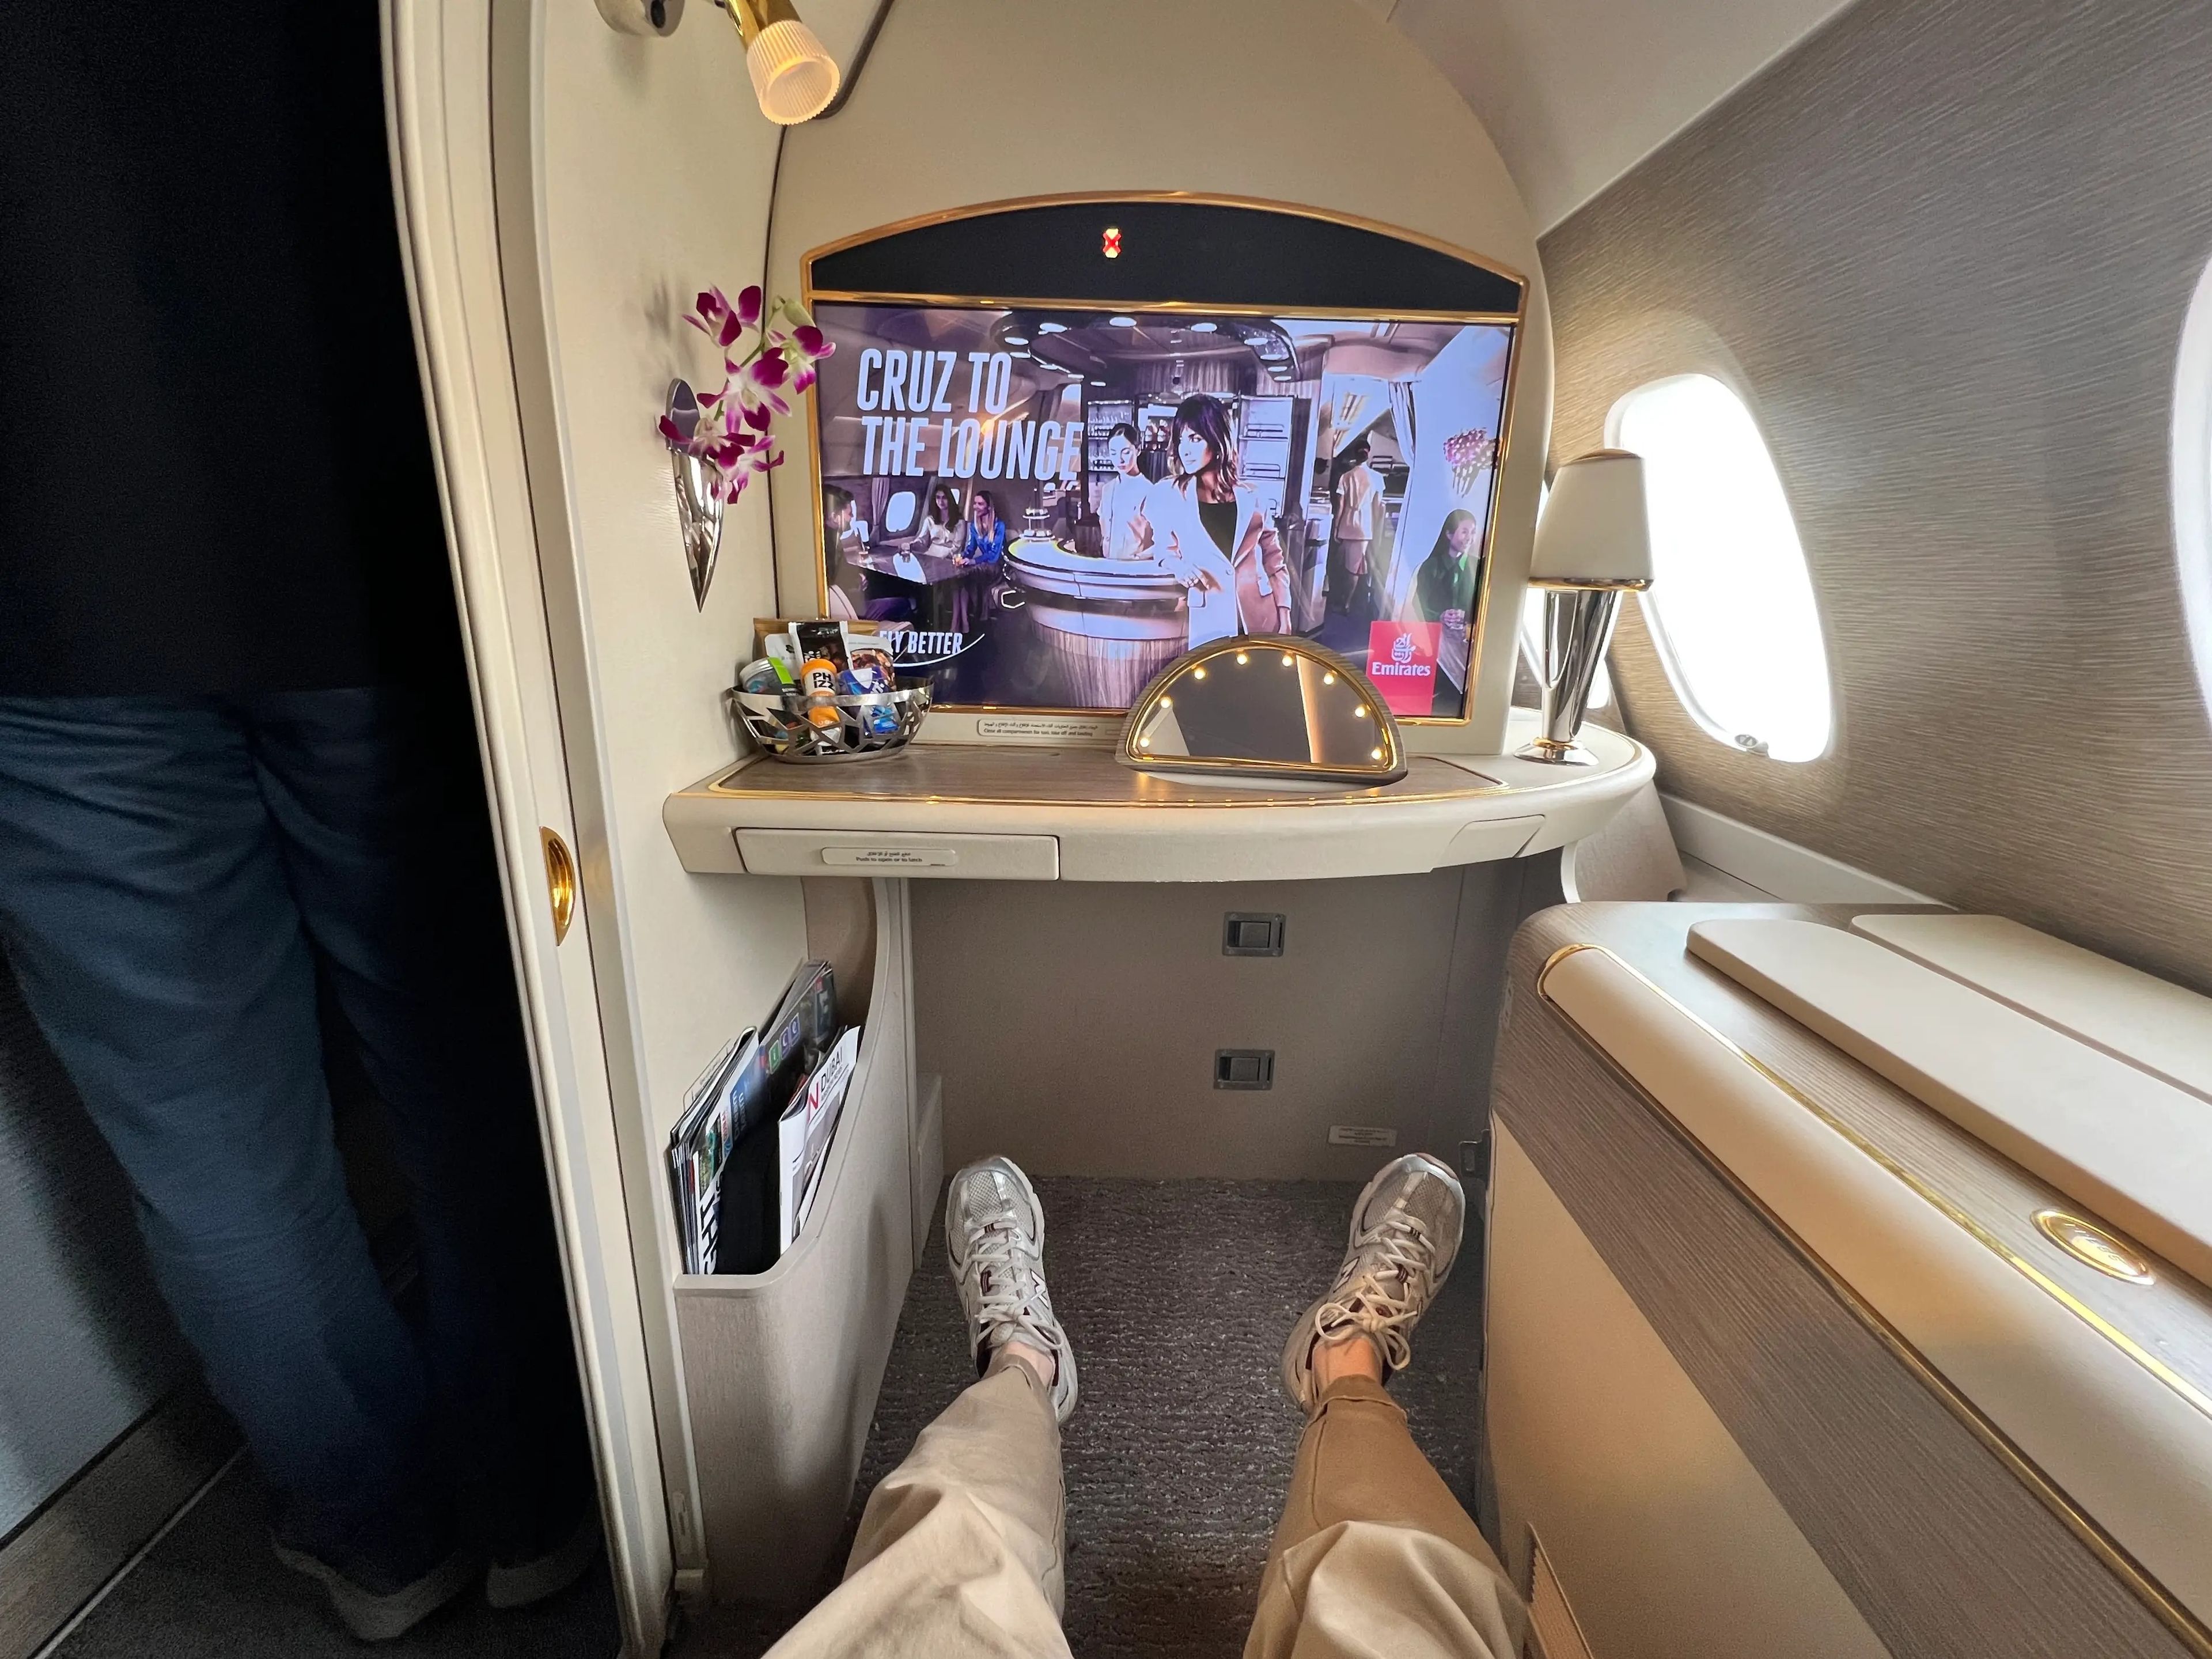 Passenger point-of-view stretching out legs in first class on Emirates A380 and TV in the background